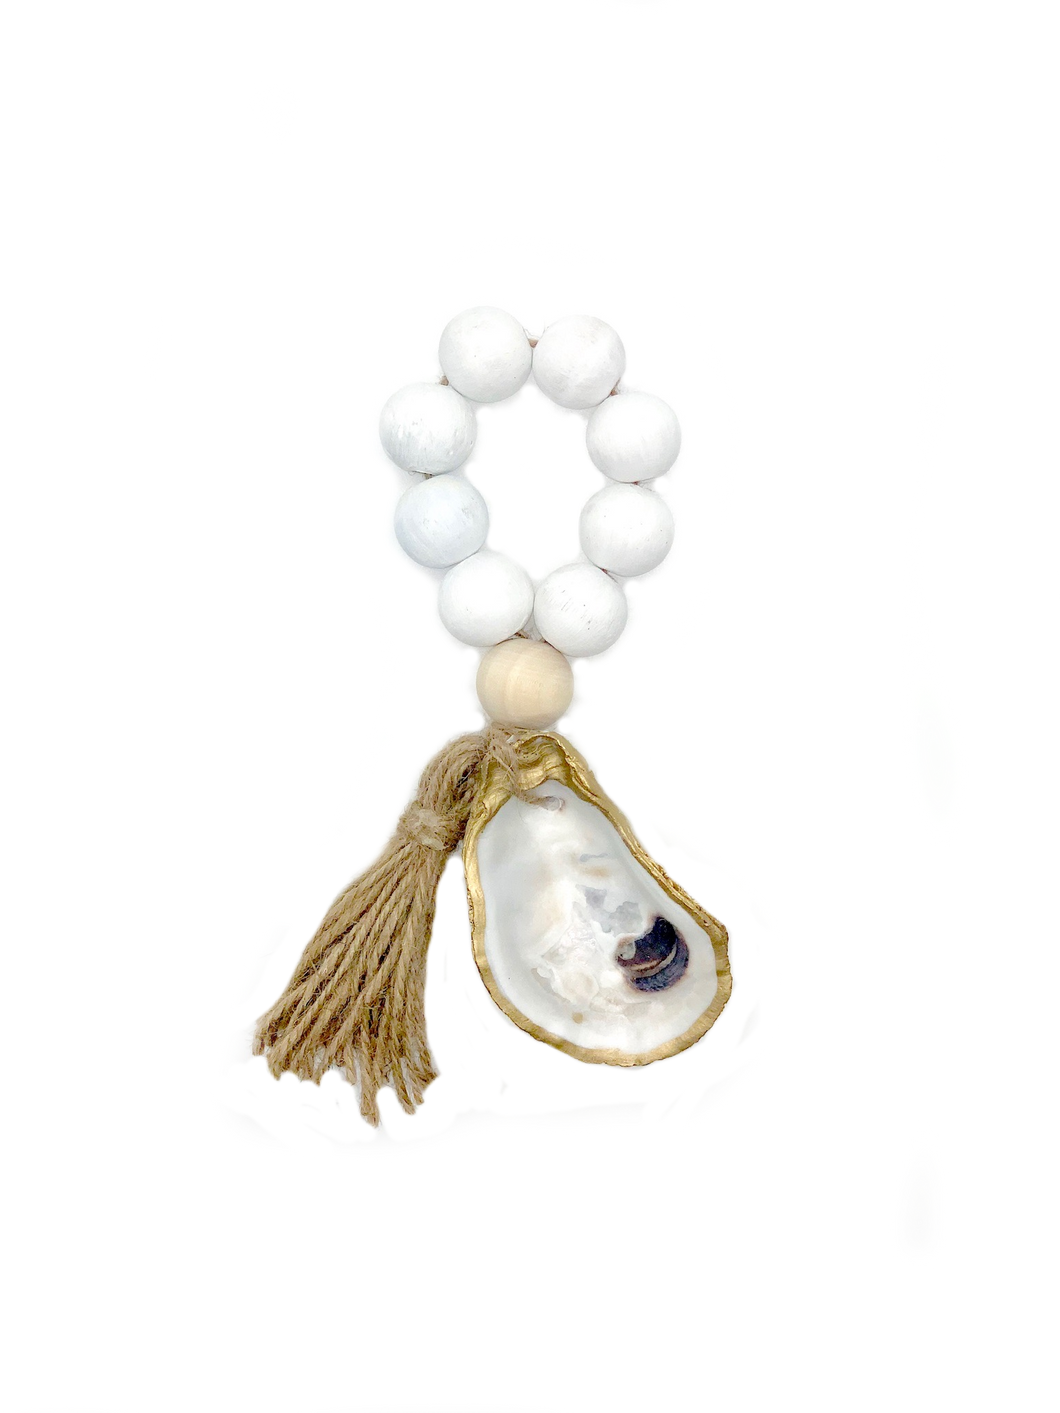 The Gilded Shell - The Boho - The Splash - 18k Gold Gilded Oyster Shell - Lifestyle Photo - 1